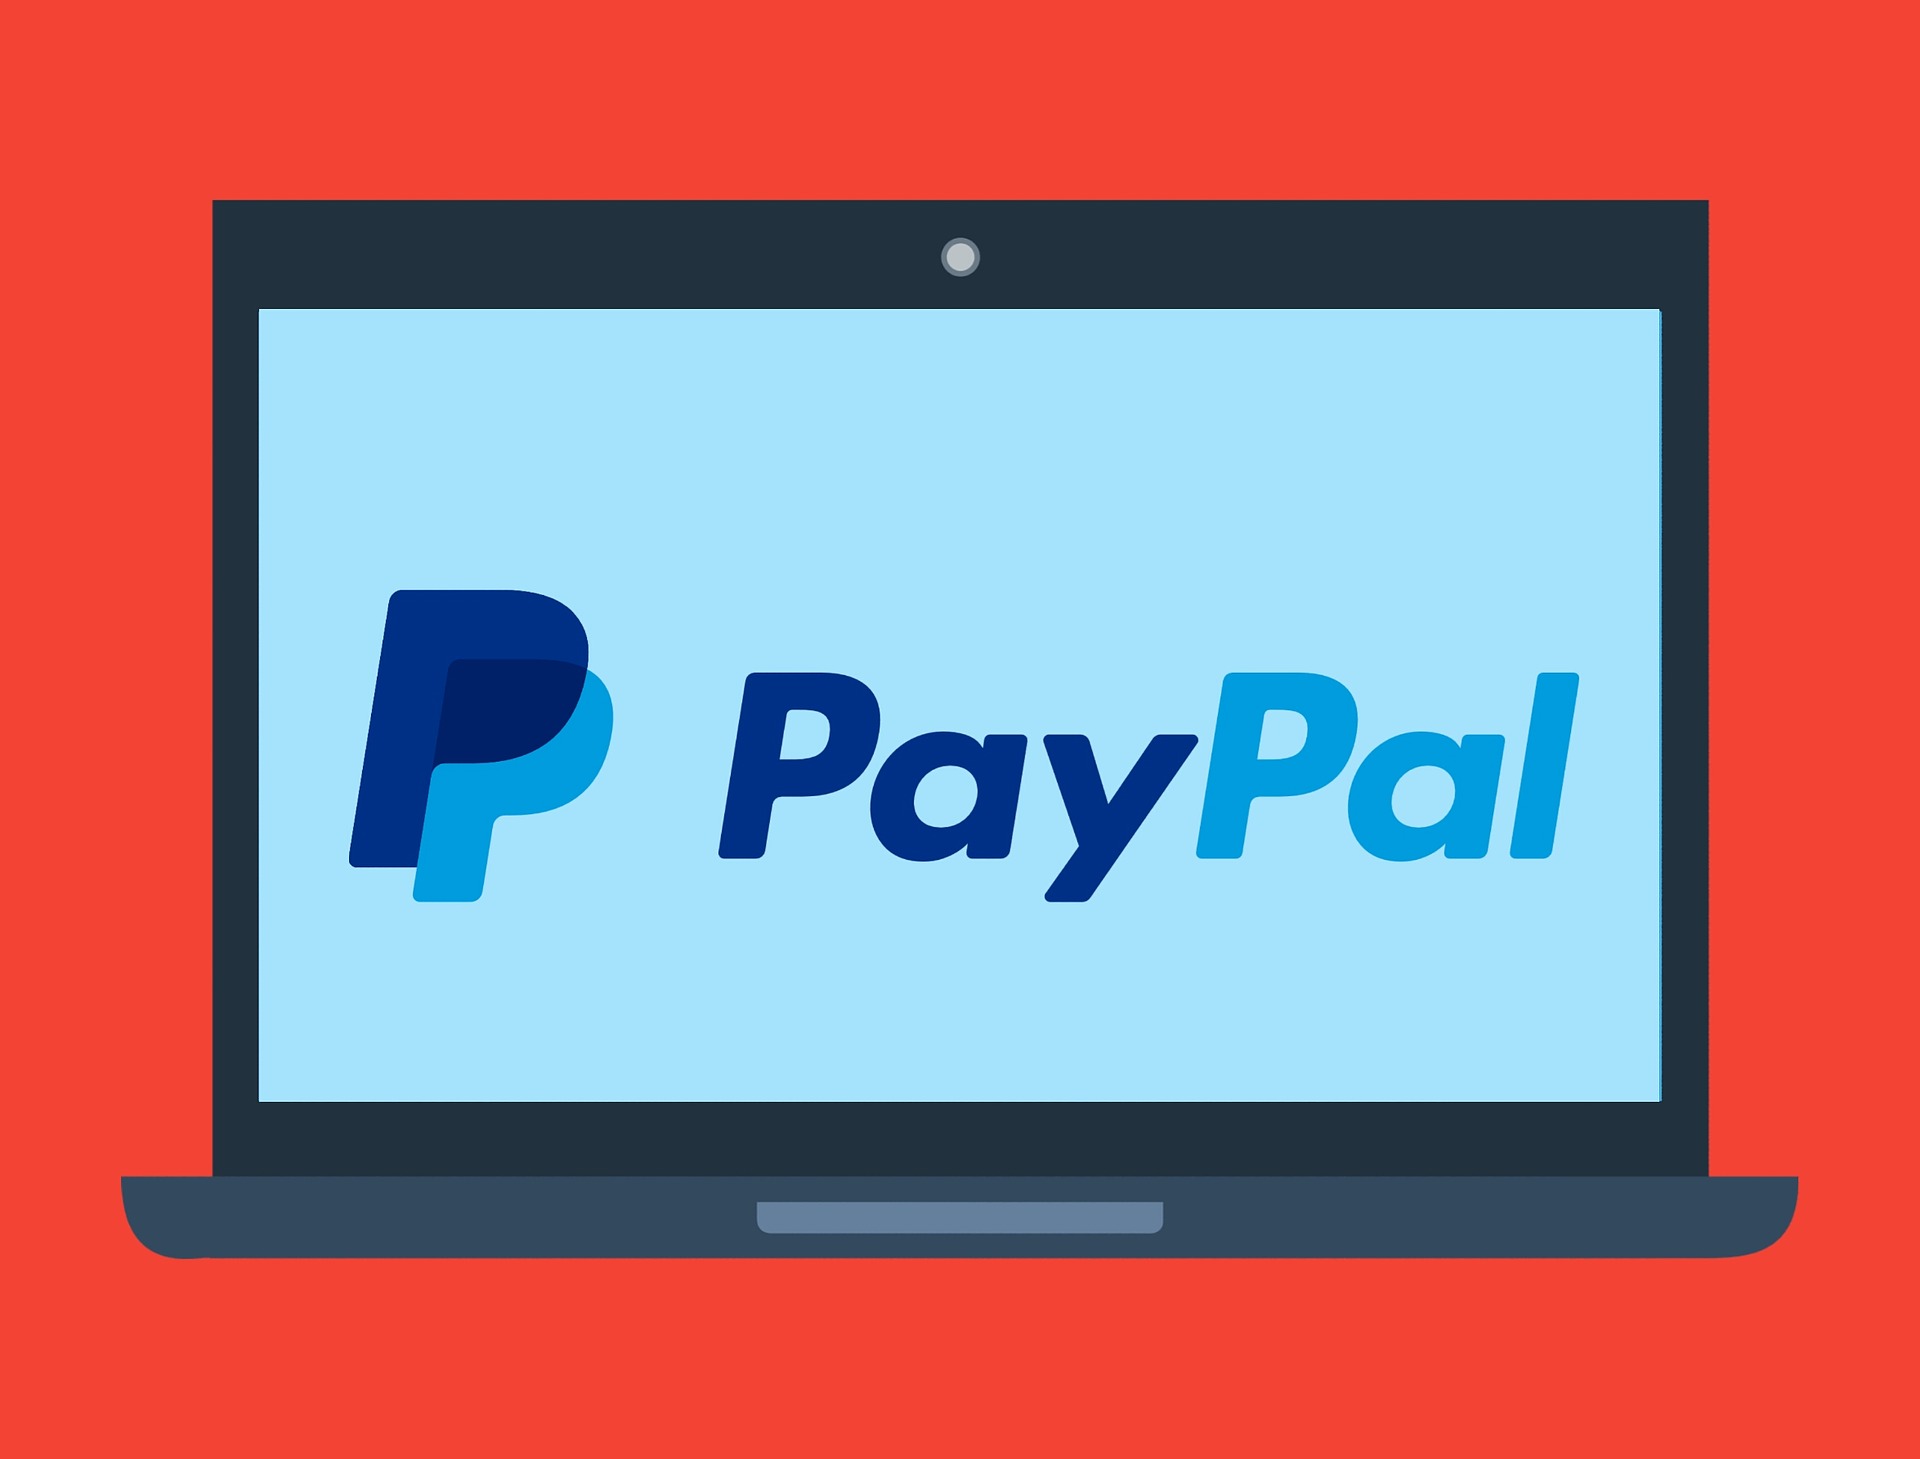 Read more about the article How To Get Free Paypal Gift Cards (That I Earned $1000 From)<span class="rmp-archive-results-widget "><i class=" rmp-icon rmp-icon--ratings rmp-icon--star rmp-icon--full-highlight"></i><i class=" rmp-icon rmp-icon--ratings rmp-icon--star rmp-icon--full-highlight"></i><i class=" rmp-icon rmp-icon--ratings rmp-icon--star rmp-icon--full-highlight"></i><i class=" rmp-icon rmp-icon--ratings rmp-icon--star rmp-icon--full-highlight"></i><i class=" rmp-icon rmp-icon--ratings rmp-icon--star rmp-icon--full-highlight"></i> <span>5 (48)</span></span>